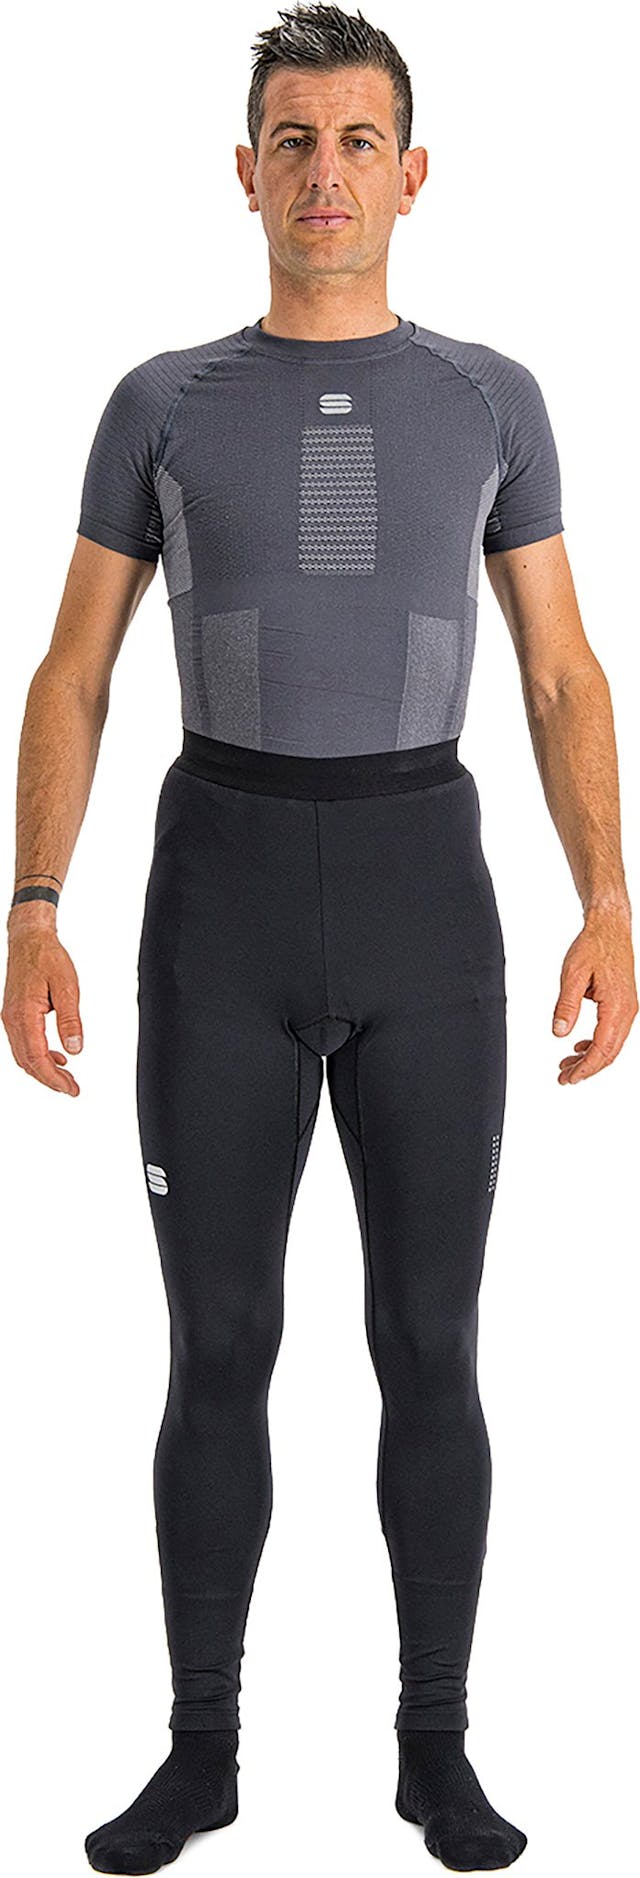 Product image for Cardio Light Tight -Men's